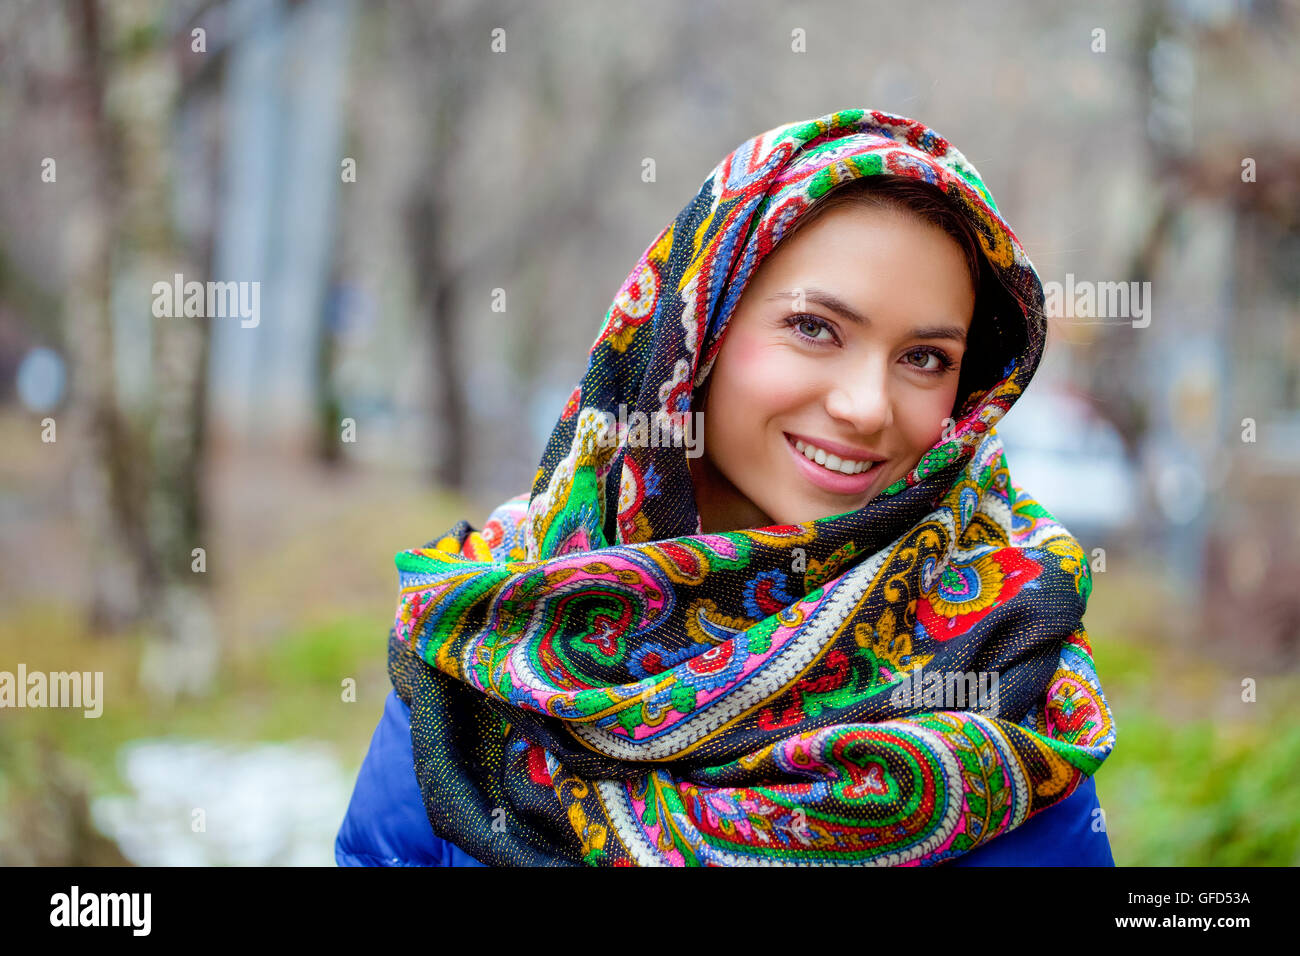 https://c8.alamy.com/comp/GFD53A/russian-beauty-woman-in-the-national-patterned-shawl-GFD53A.jpg